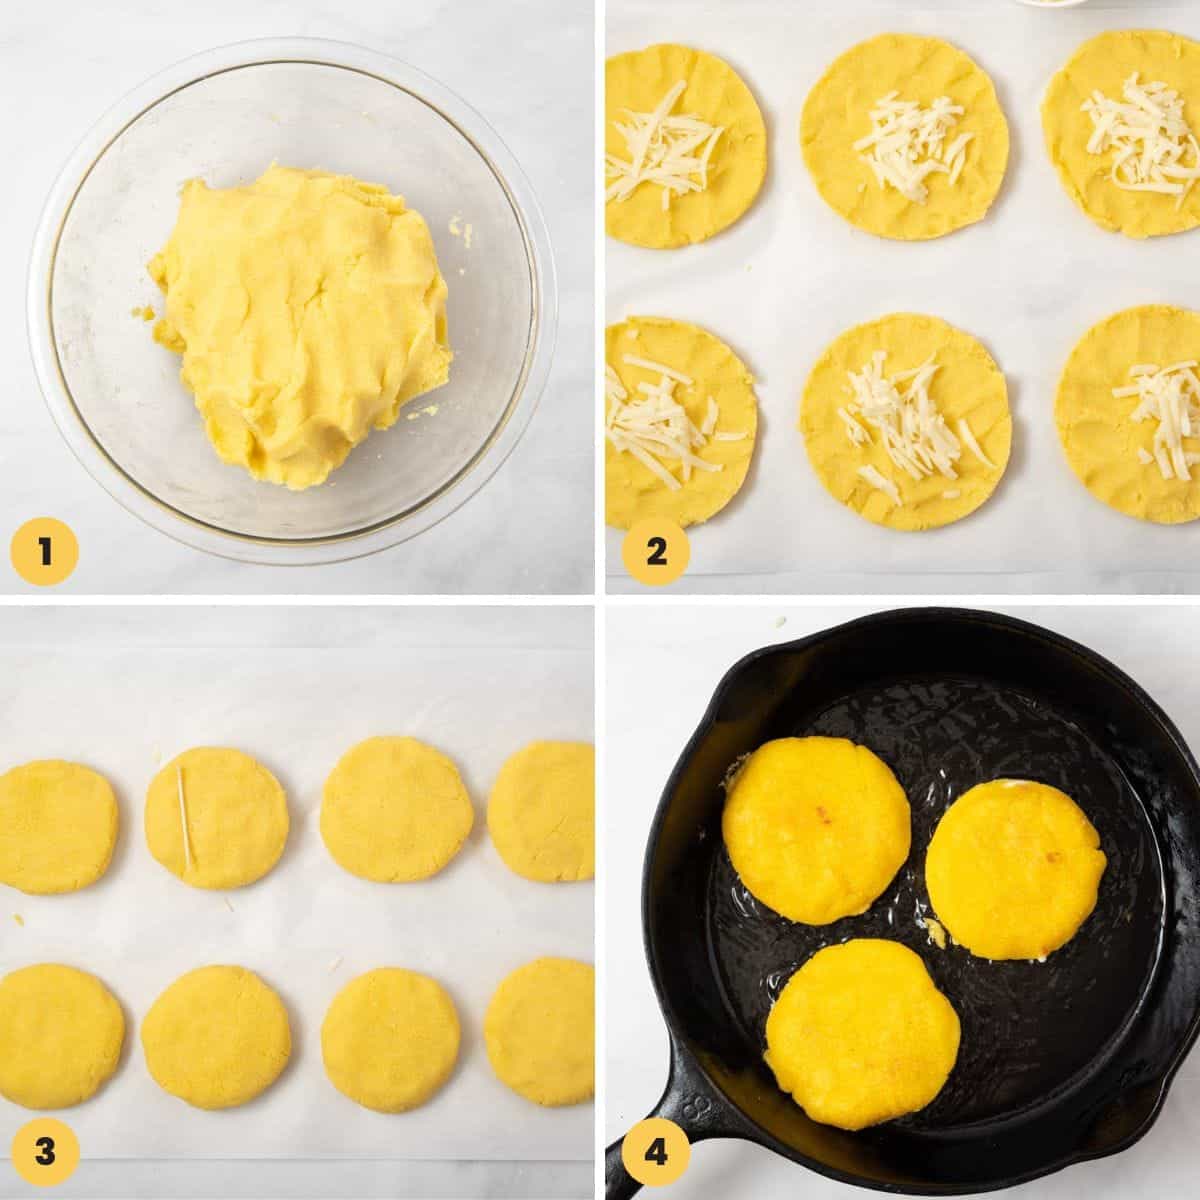 a collage of four images showing how to make arepas and stuff them with cheese.